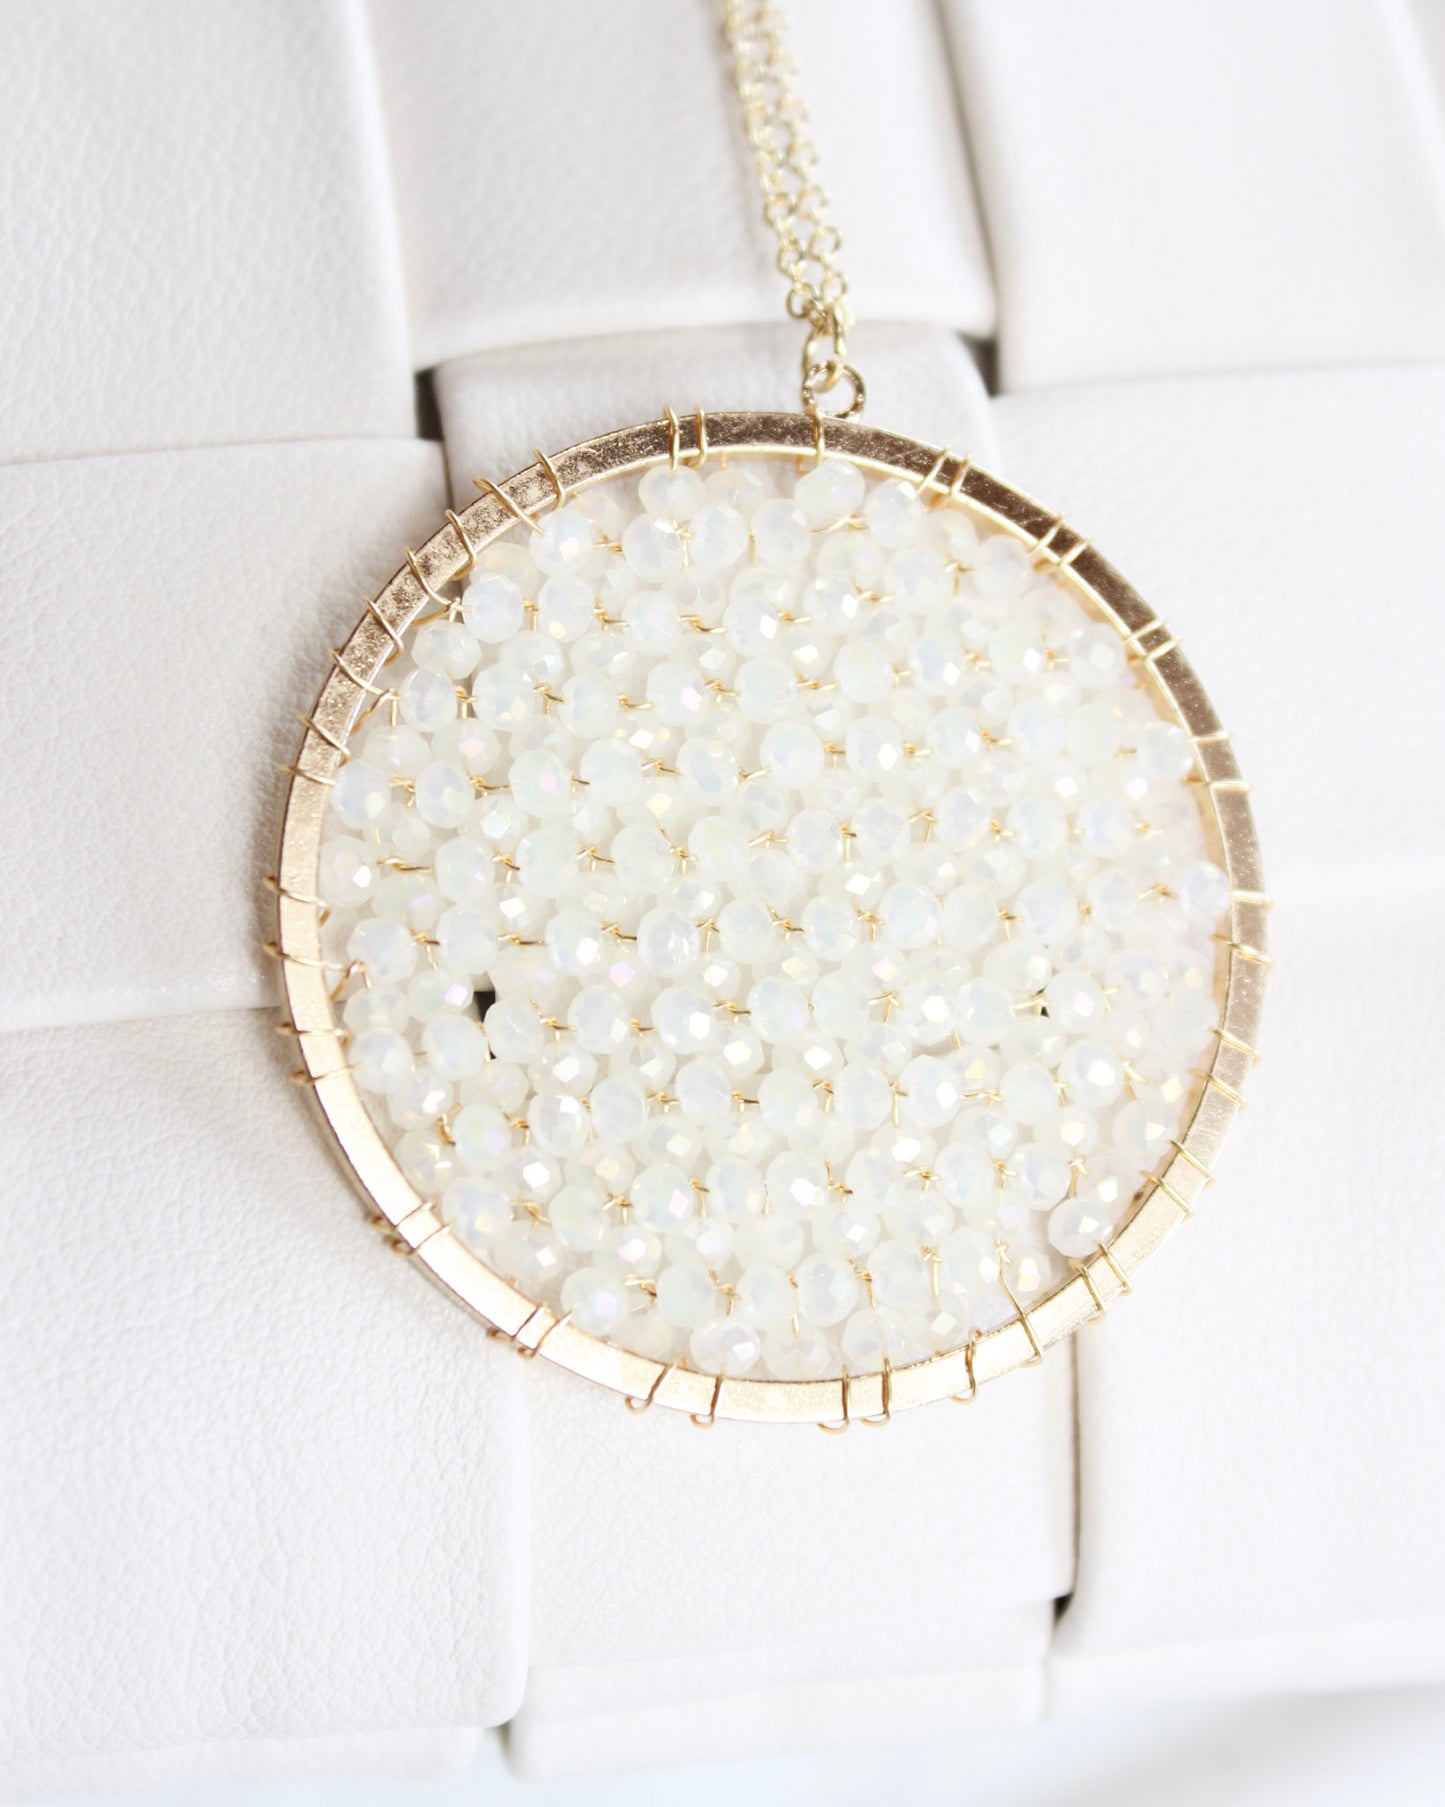 long gold chain necklace with a round white crystalized filled circle pendant